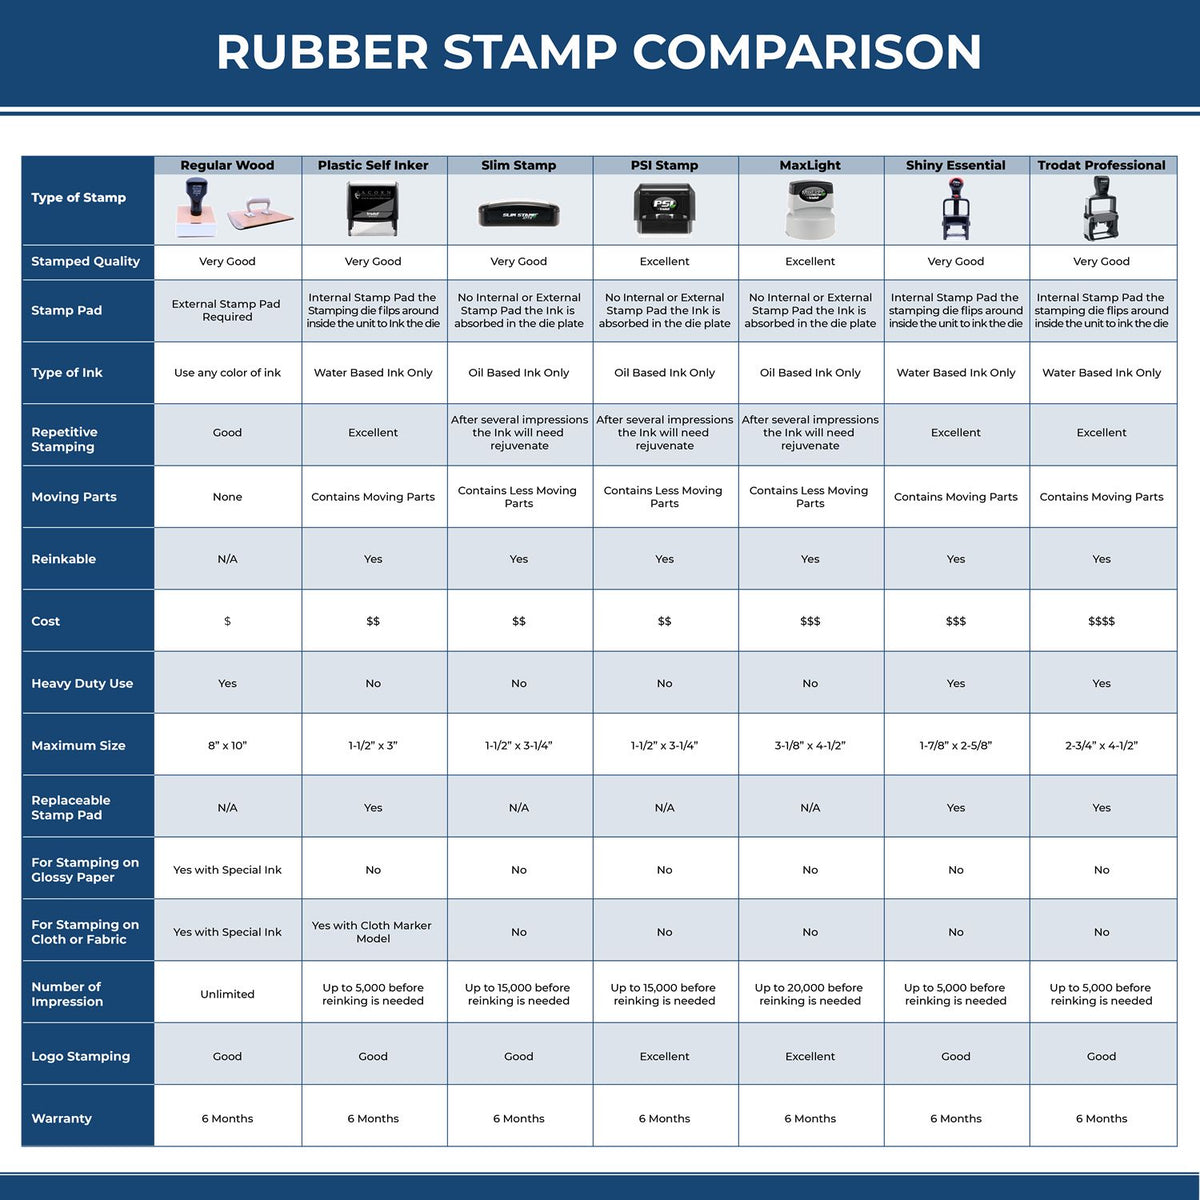 A comparison chart for the different types of mount models available for the Premium MaxLight Pre-Inked Maine Engineering Stamp.